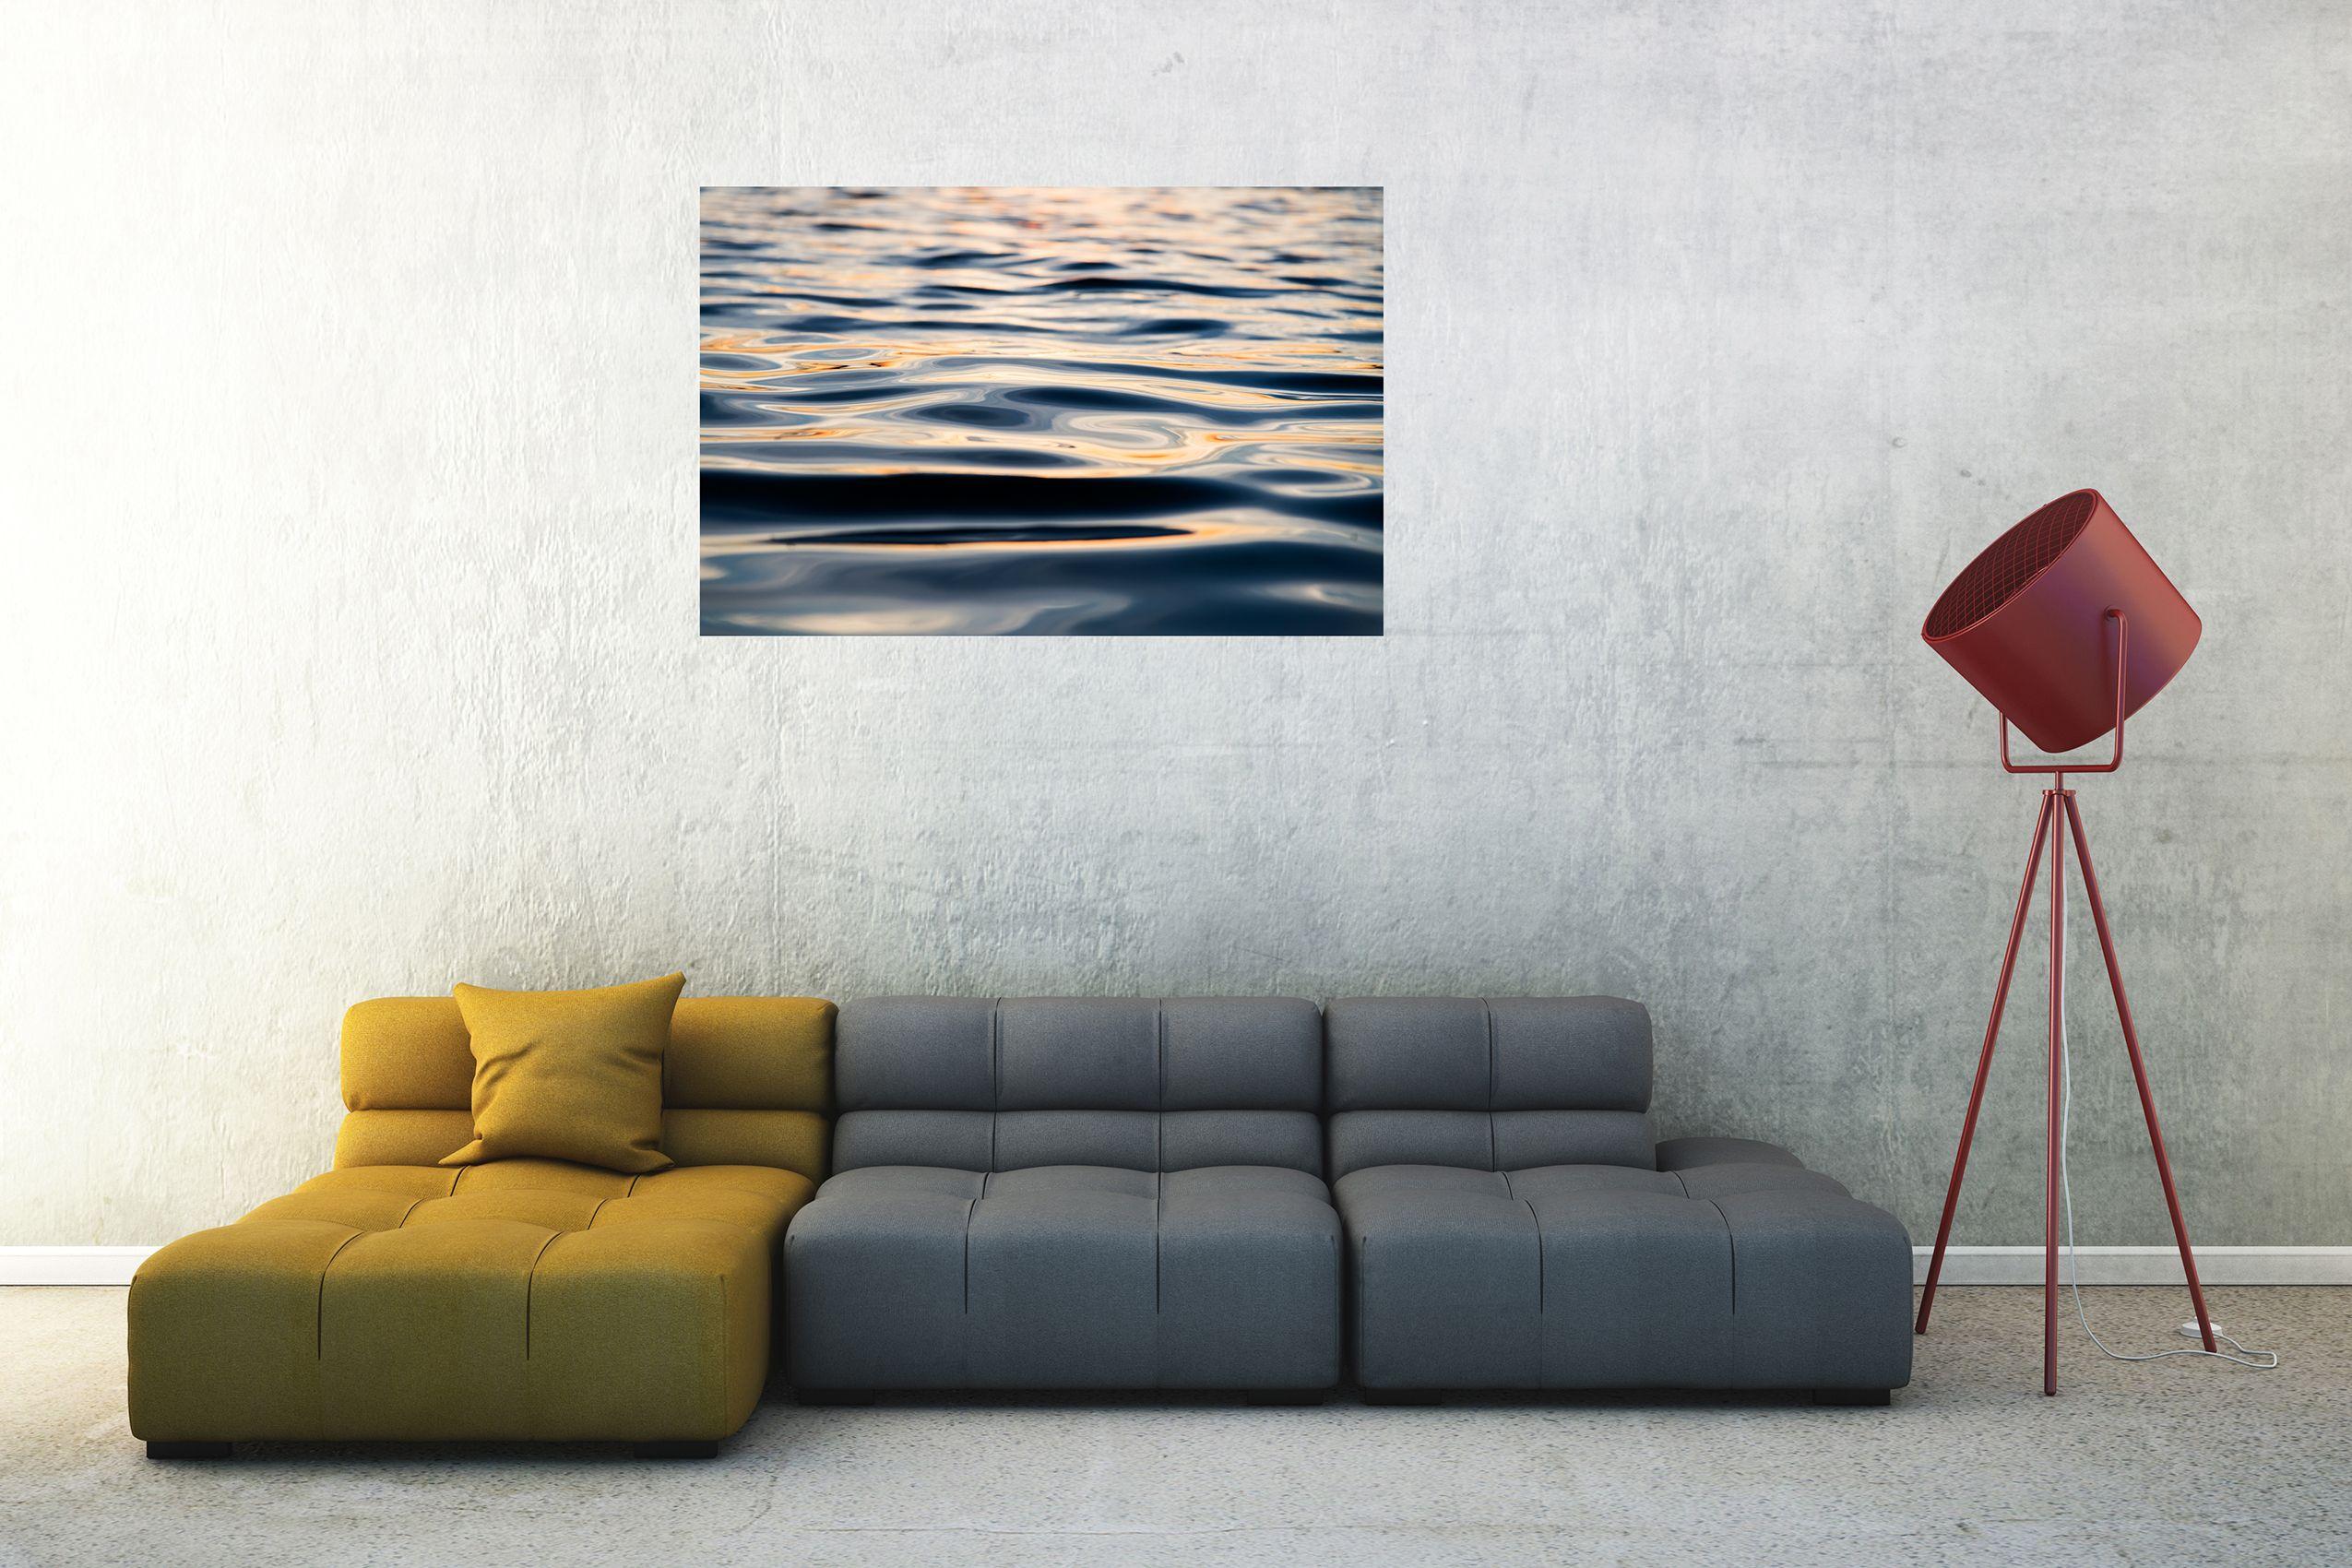 One of a series of images where Andrew has used a paddle board to capture a minimalist colour artwork. Laying down on the board created a unique perspective of the sea. This beautiful colour print shows that nature is the best artist displaying the